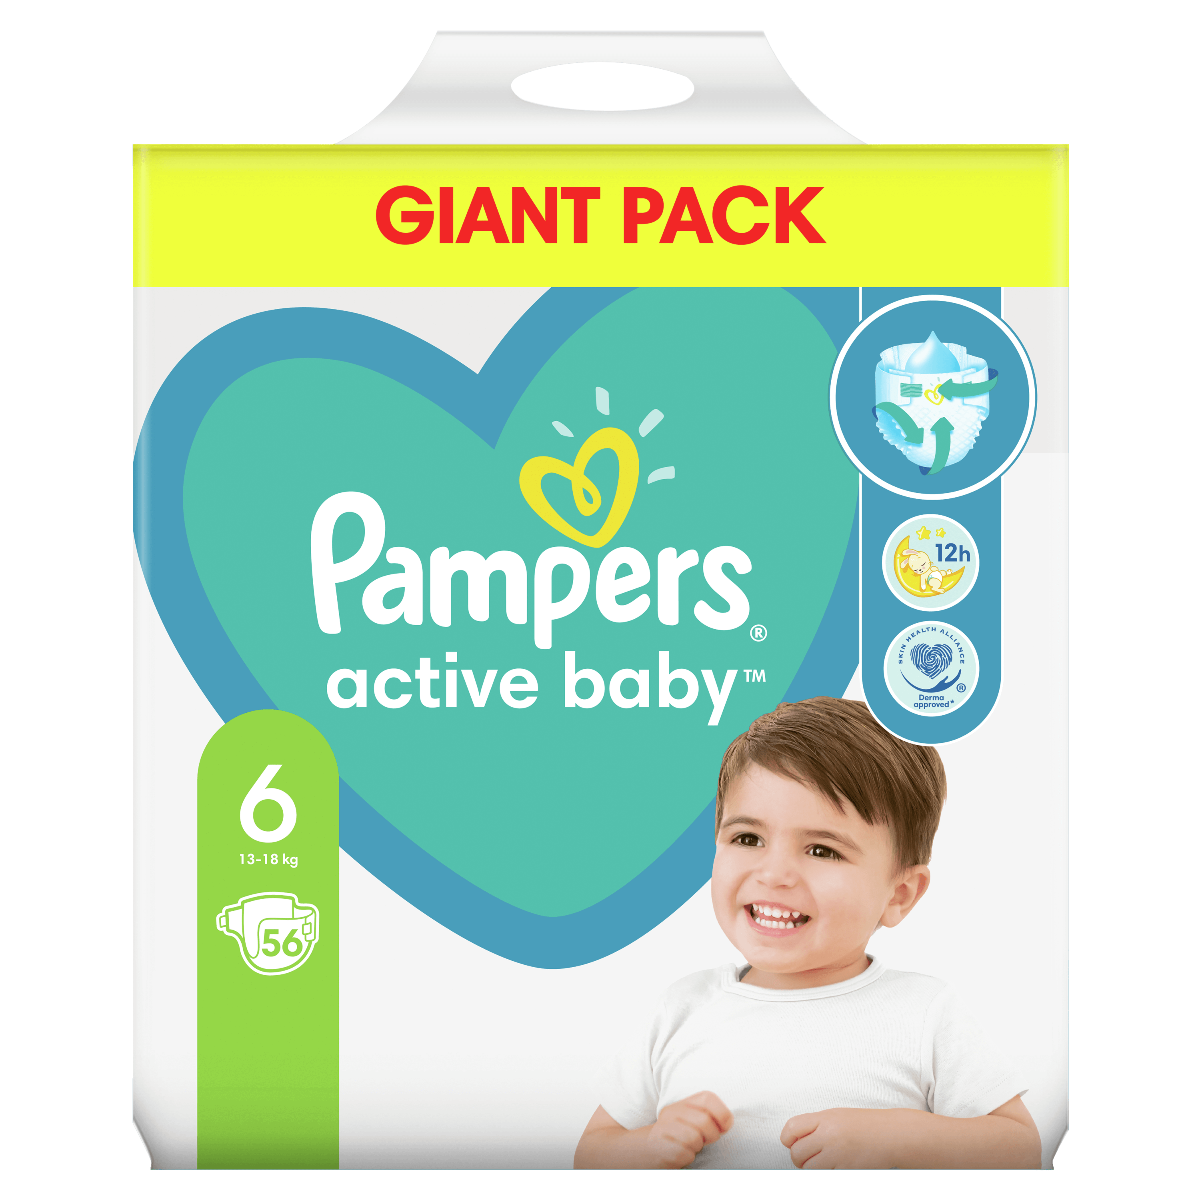 pampers new baby dry biedronka